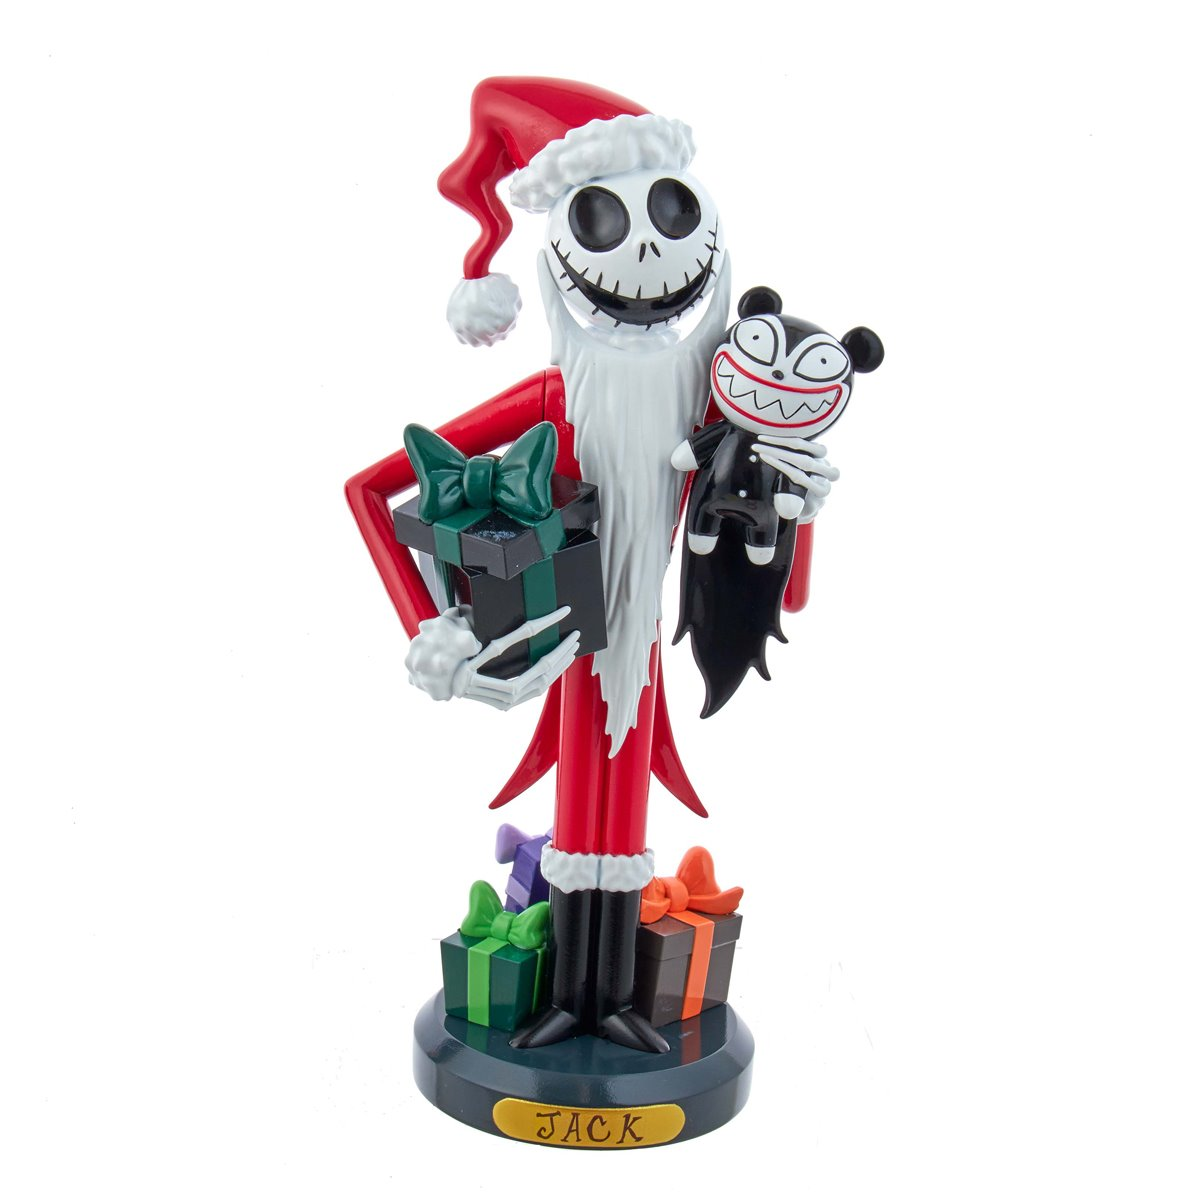 This 10-Inch Disney Nightmare Before Christmas Jack Skellington Nutcracker from Kurt Adler is a fun and festive addition to any holiday décor or nutcracker collection. Featured wearing his "Sandy Claws" outfit and holding Vampire, Jack Skellington is ready to take over Christmas with presents for his friends in Halloween Town!